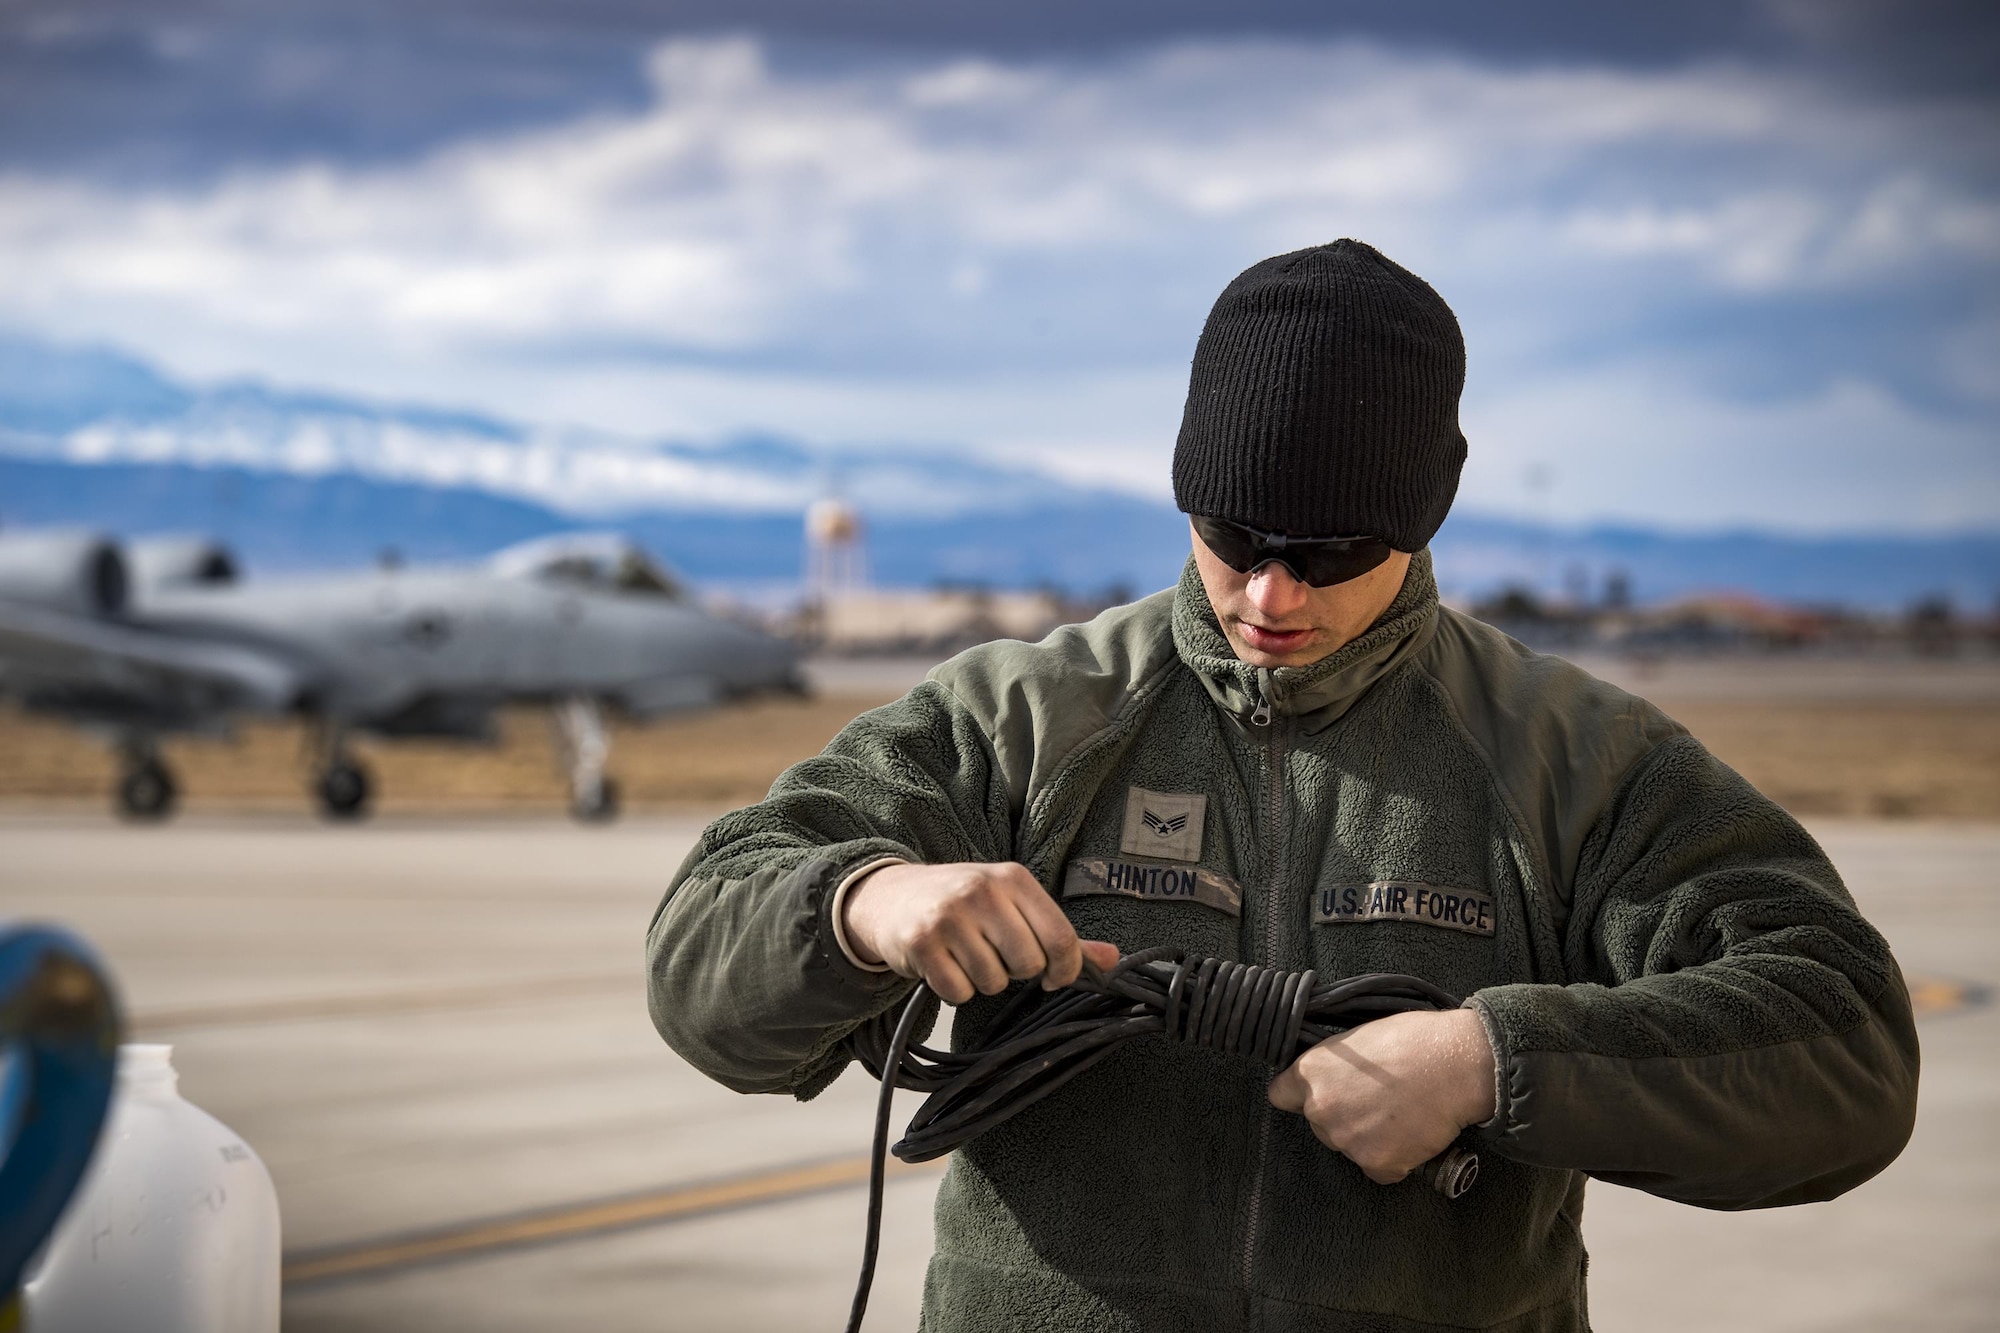 Senior Airman Eric Hinton, 74th Aircraft Maintenance Unit crew chief, wraps a communications cord as an A-10C Thunderbolt II taxis to the flightline during Green Flag-West 17-03, Jan. 23, 2017, at Nellis Air Force Base, Nev. GFW is an air-land integration combat training exercise, which hosted 12 A-10s from Moody Air Force Base, Ga. Accompanying the aircraft were 130 maintenance personnel who worked around the clock to launch 18 sorties per day. (U.S. Air Force photo by Staff Sgt. Ryan Callaghan)